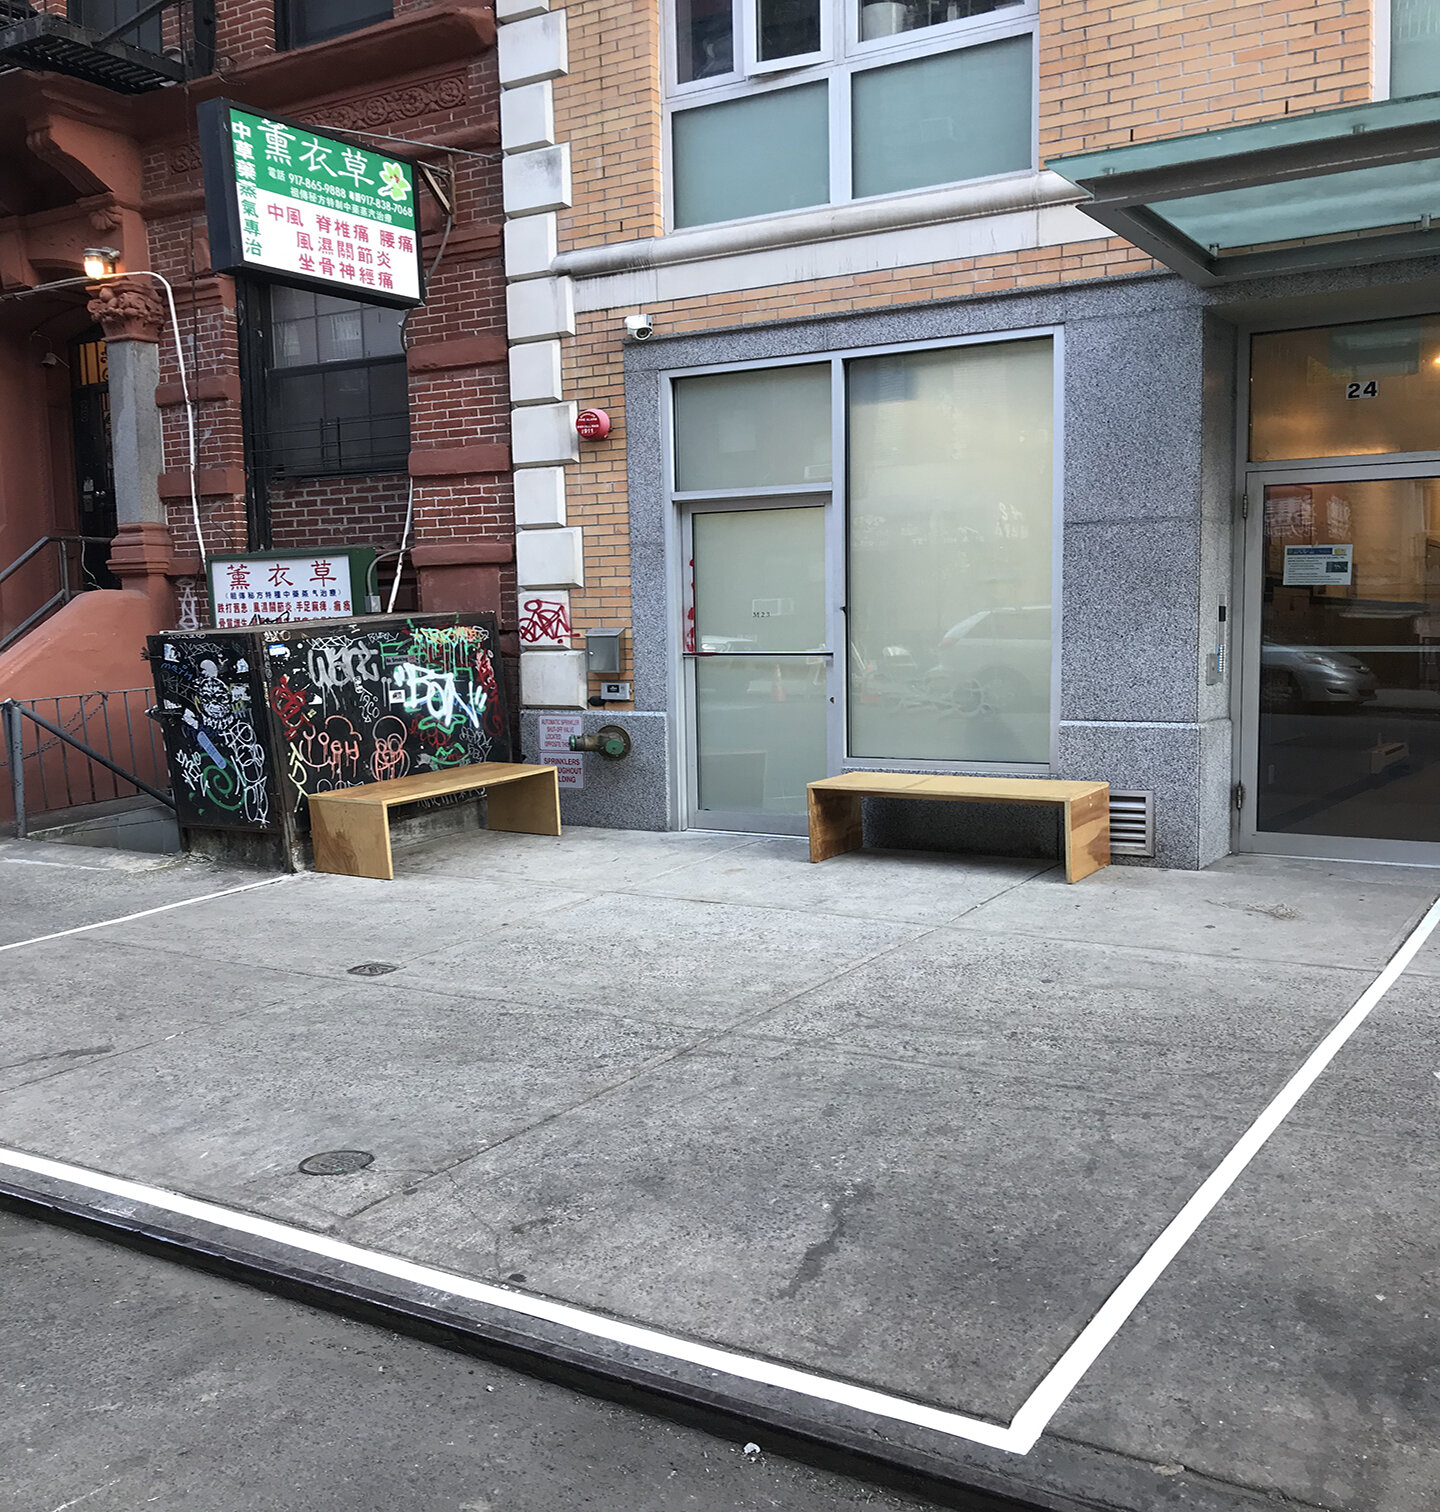  M 2 3 24 Henry Street Designated outdoor gathering area per New York City COVID guidelines 14 March 2021 storefront 